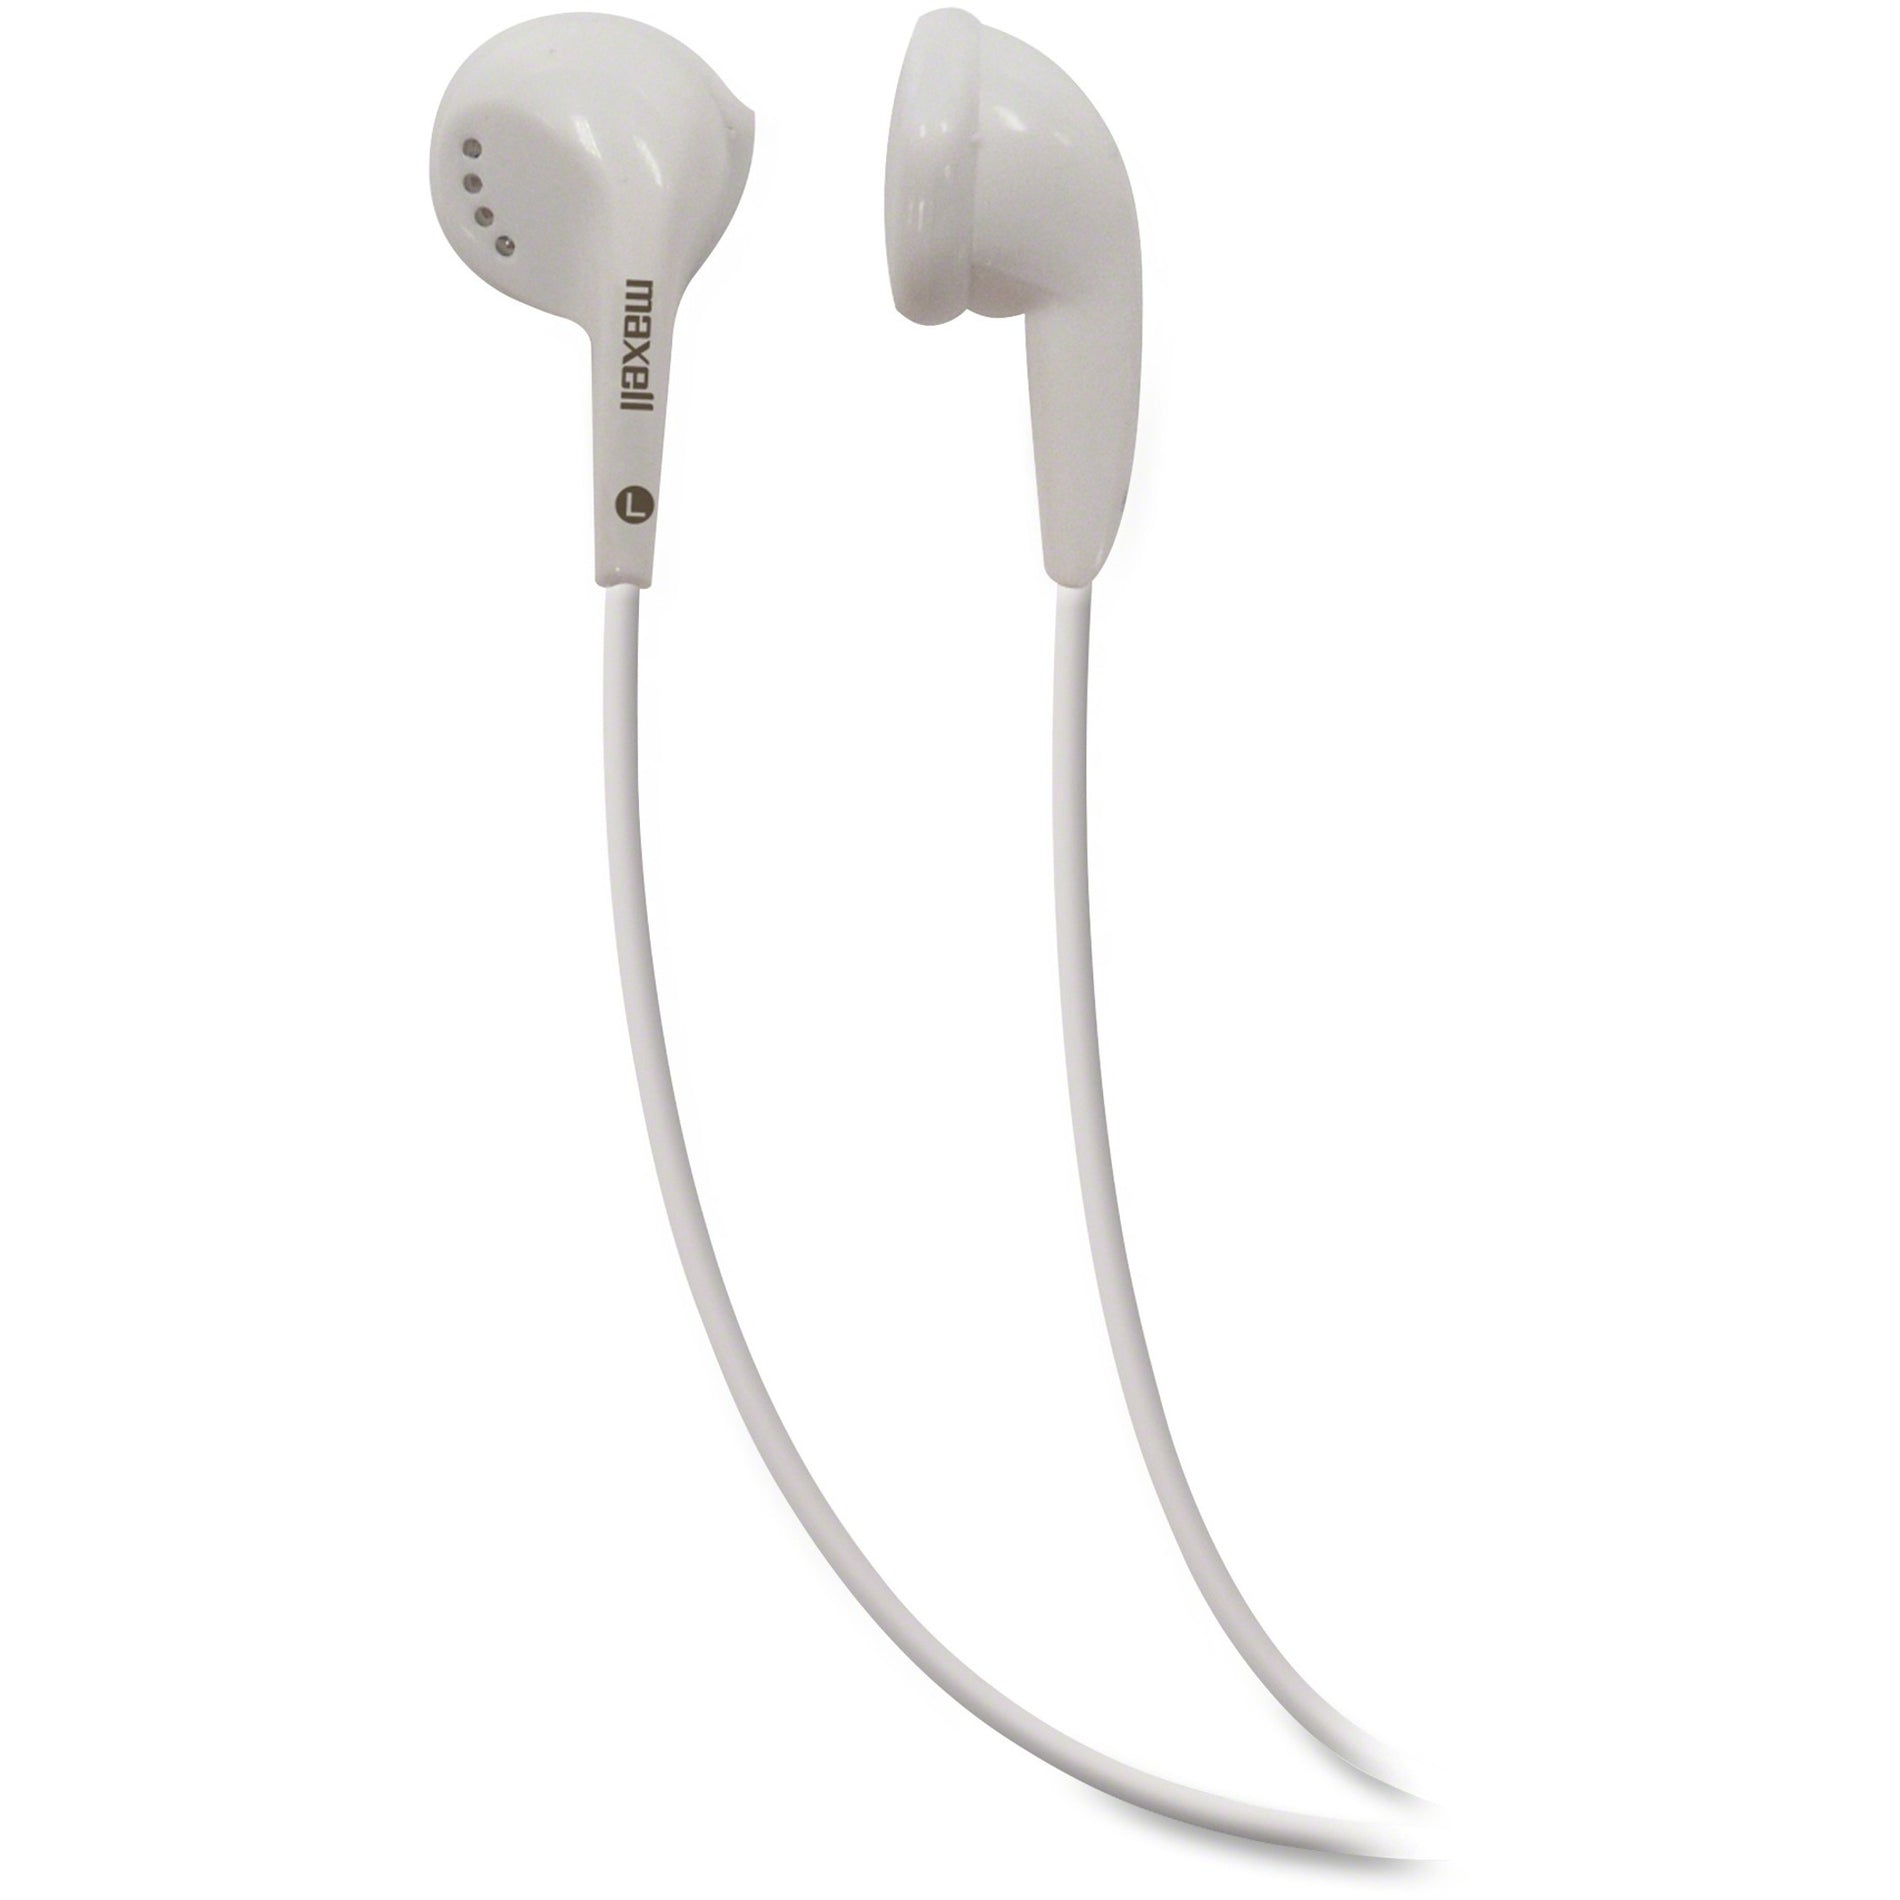 Maxell 190599 EB-95 White Earbuds, Lightweight, Comfortable Stereo Sound